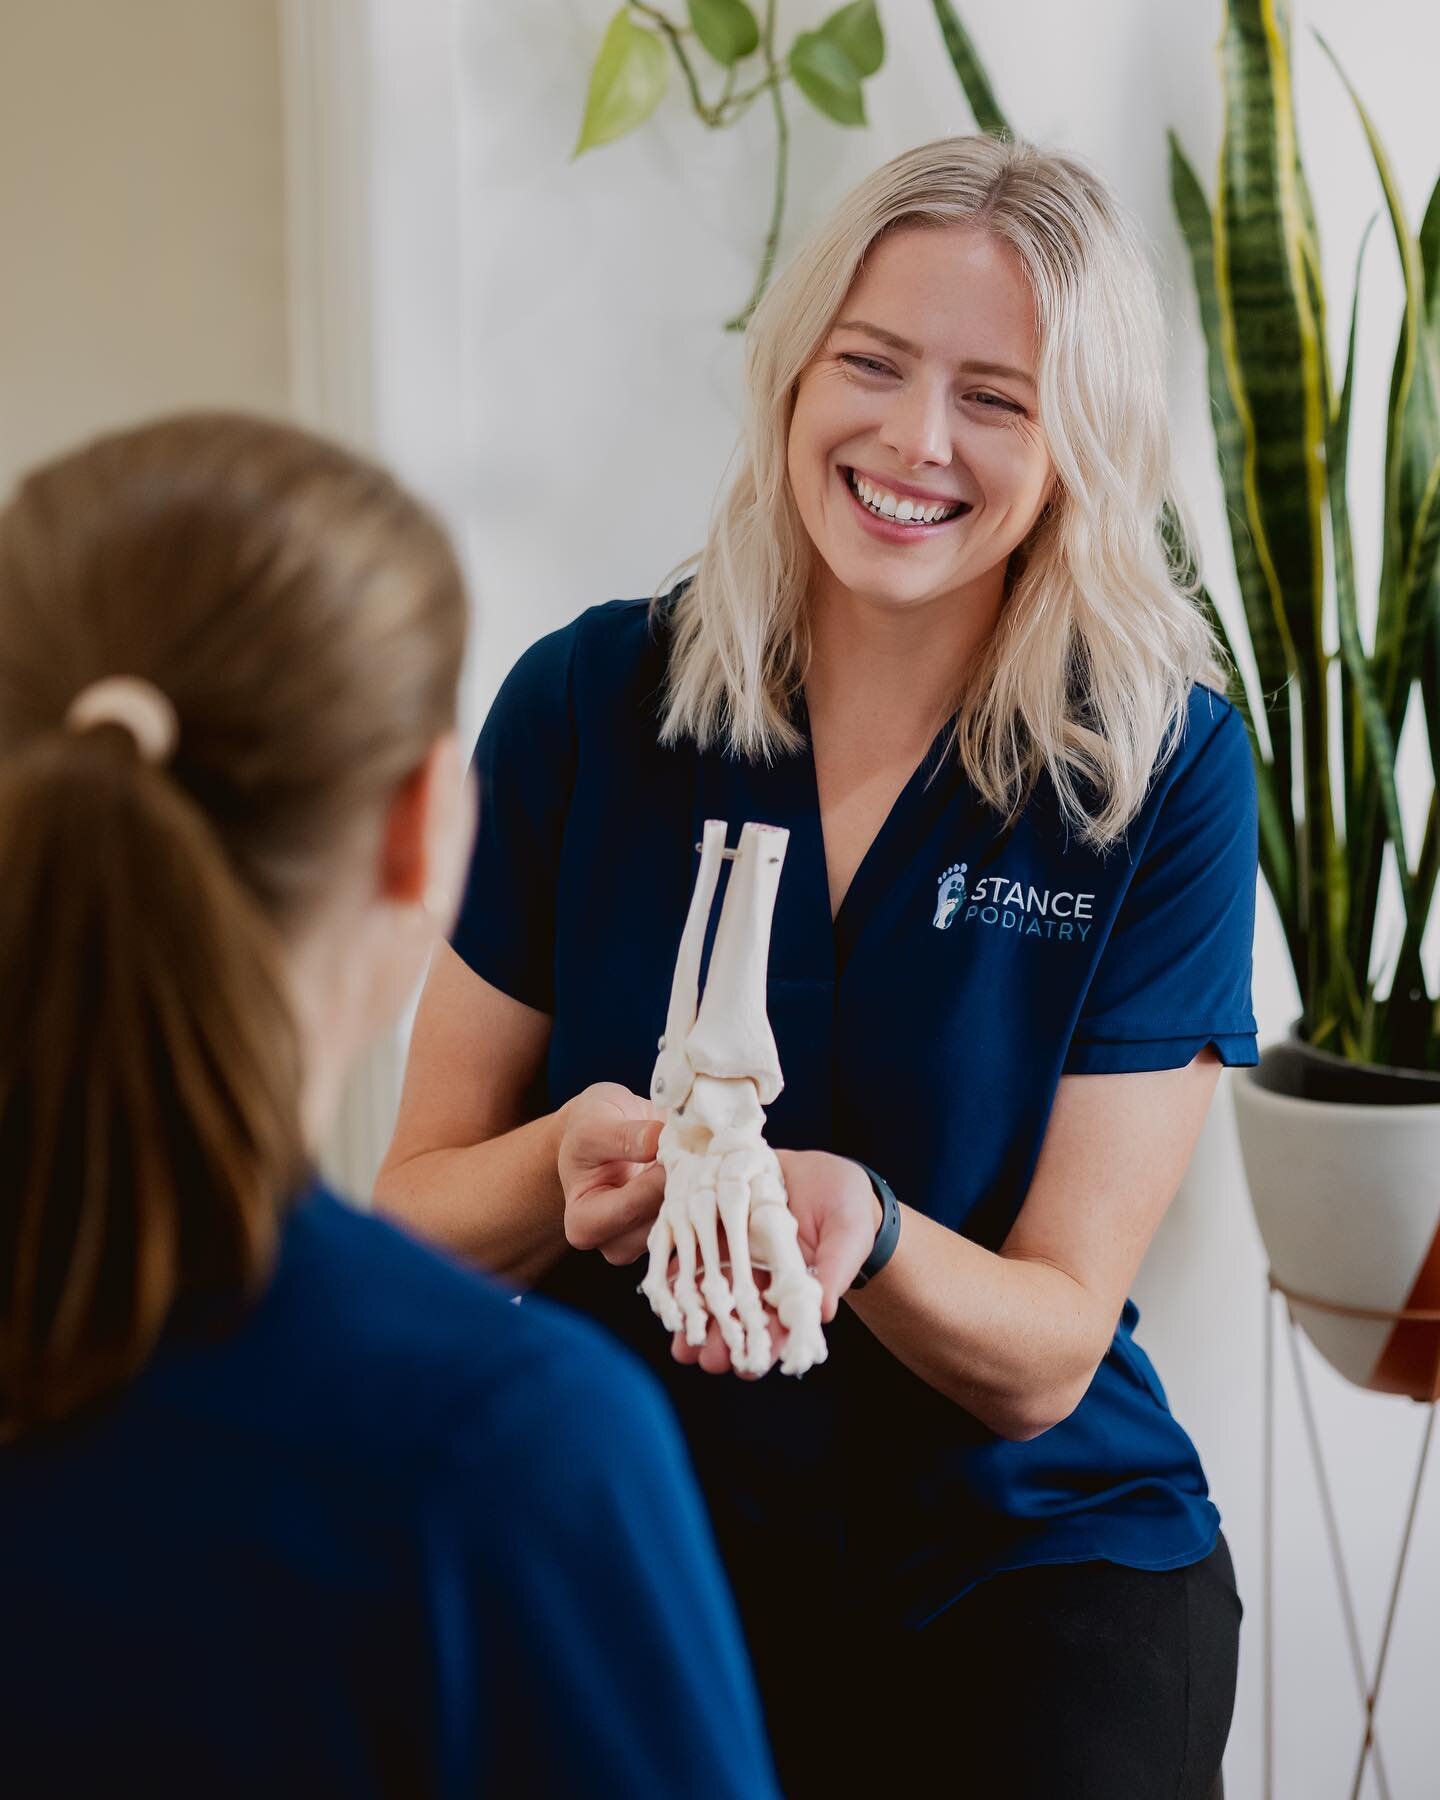 Professional Development~ Amy Hawker is currently undergoing the podiatric surgery assistance course, which involves observations of members of @podiatric.surgeons. 

This further study will help develop current clinical skills  but is also a require